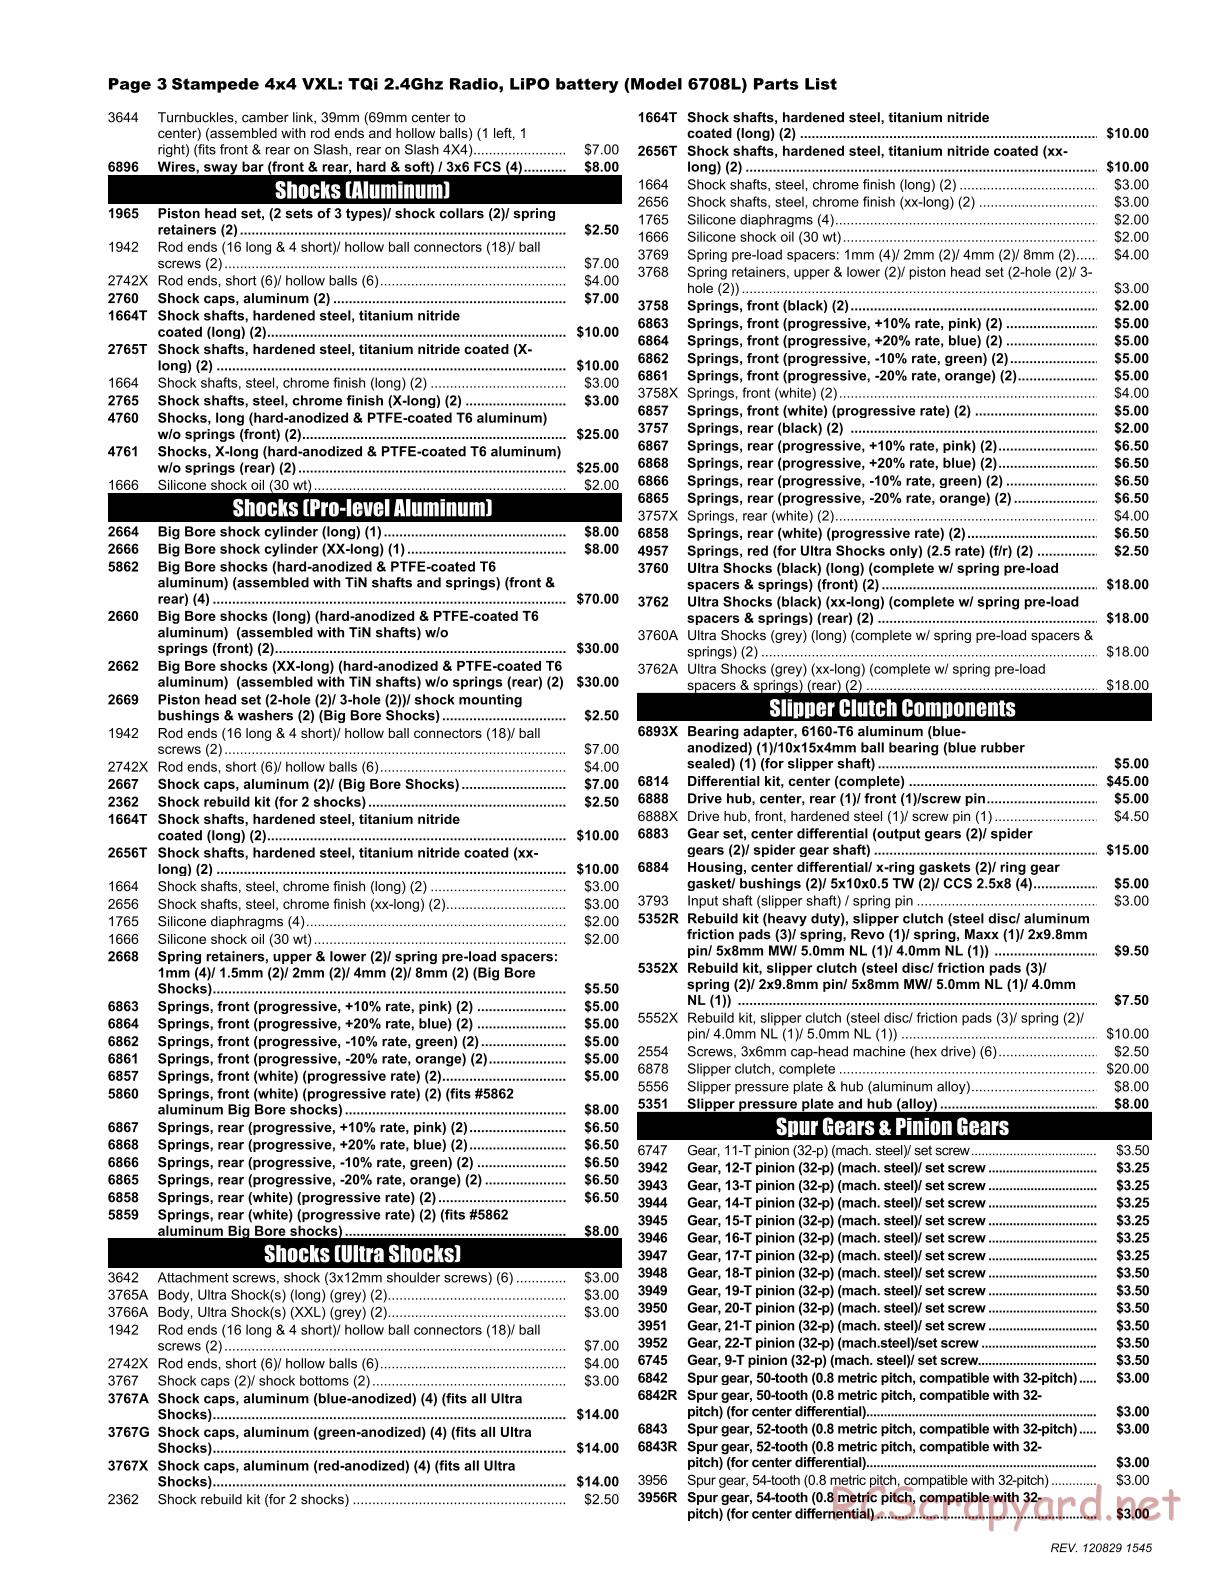 Traxxas - Stampede 4x4 VXL (2012) - Parts List - Page 3